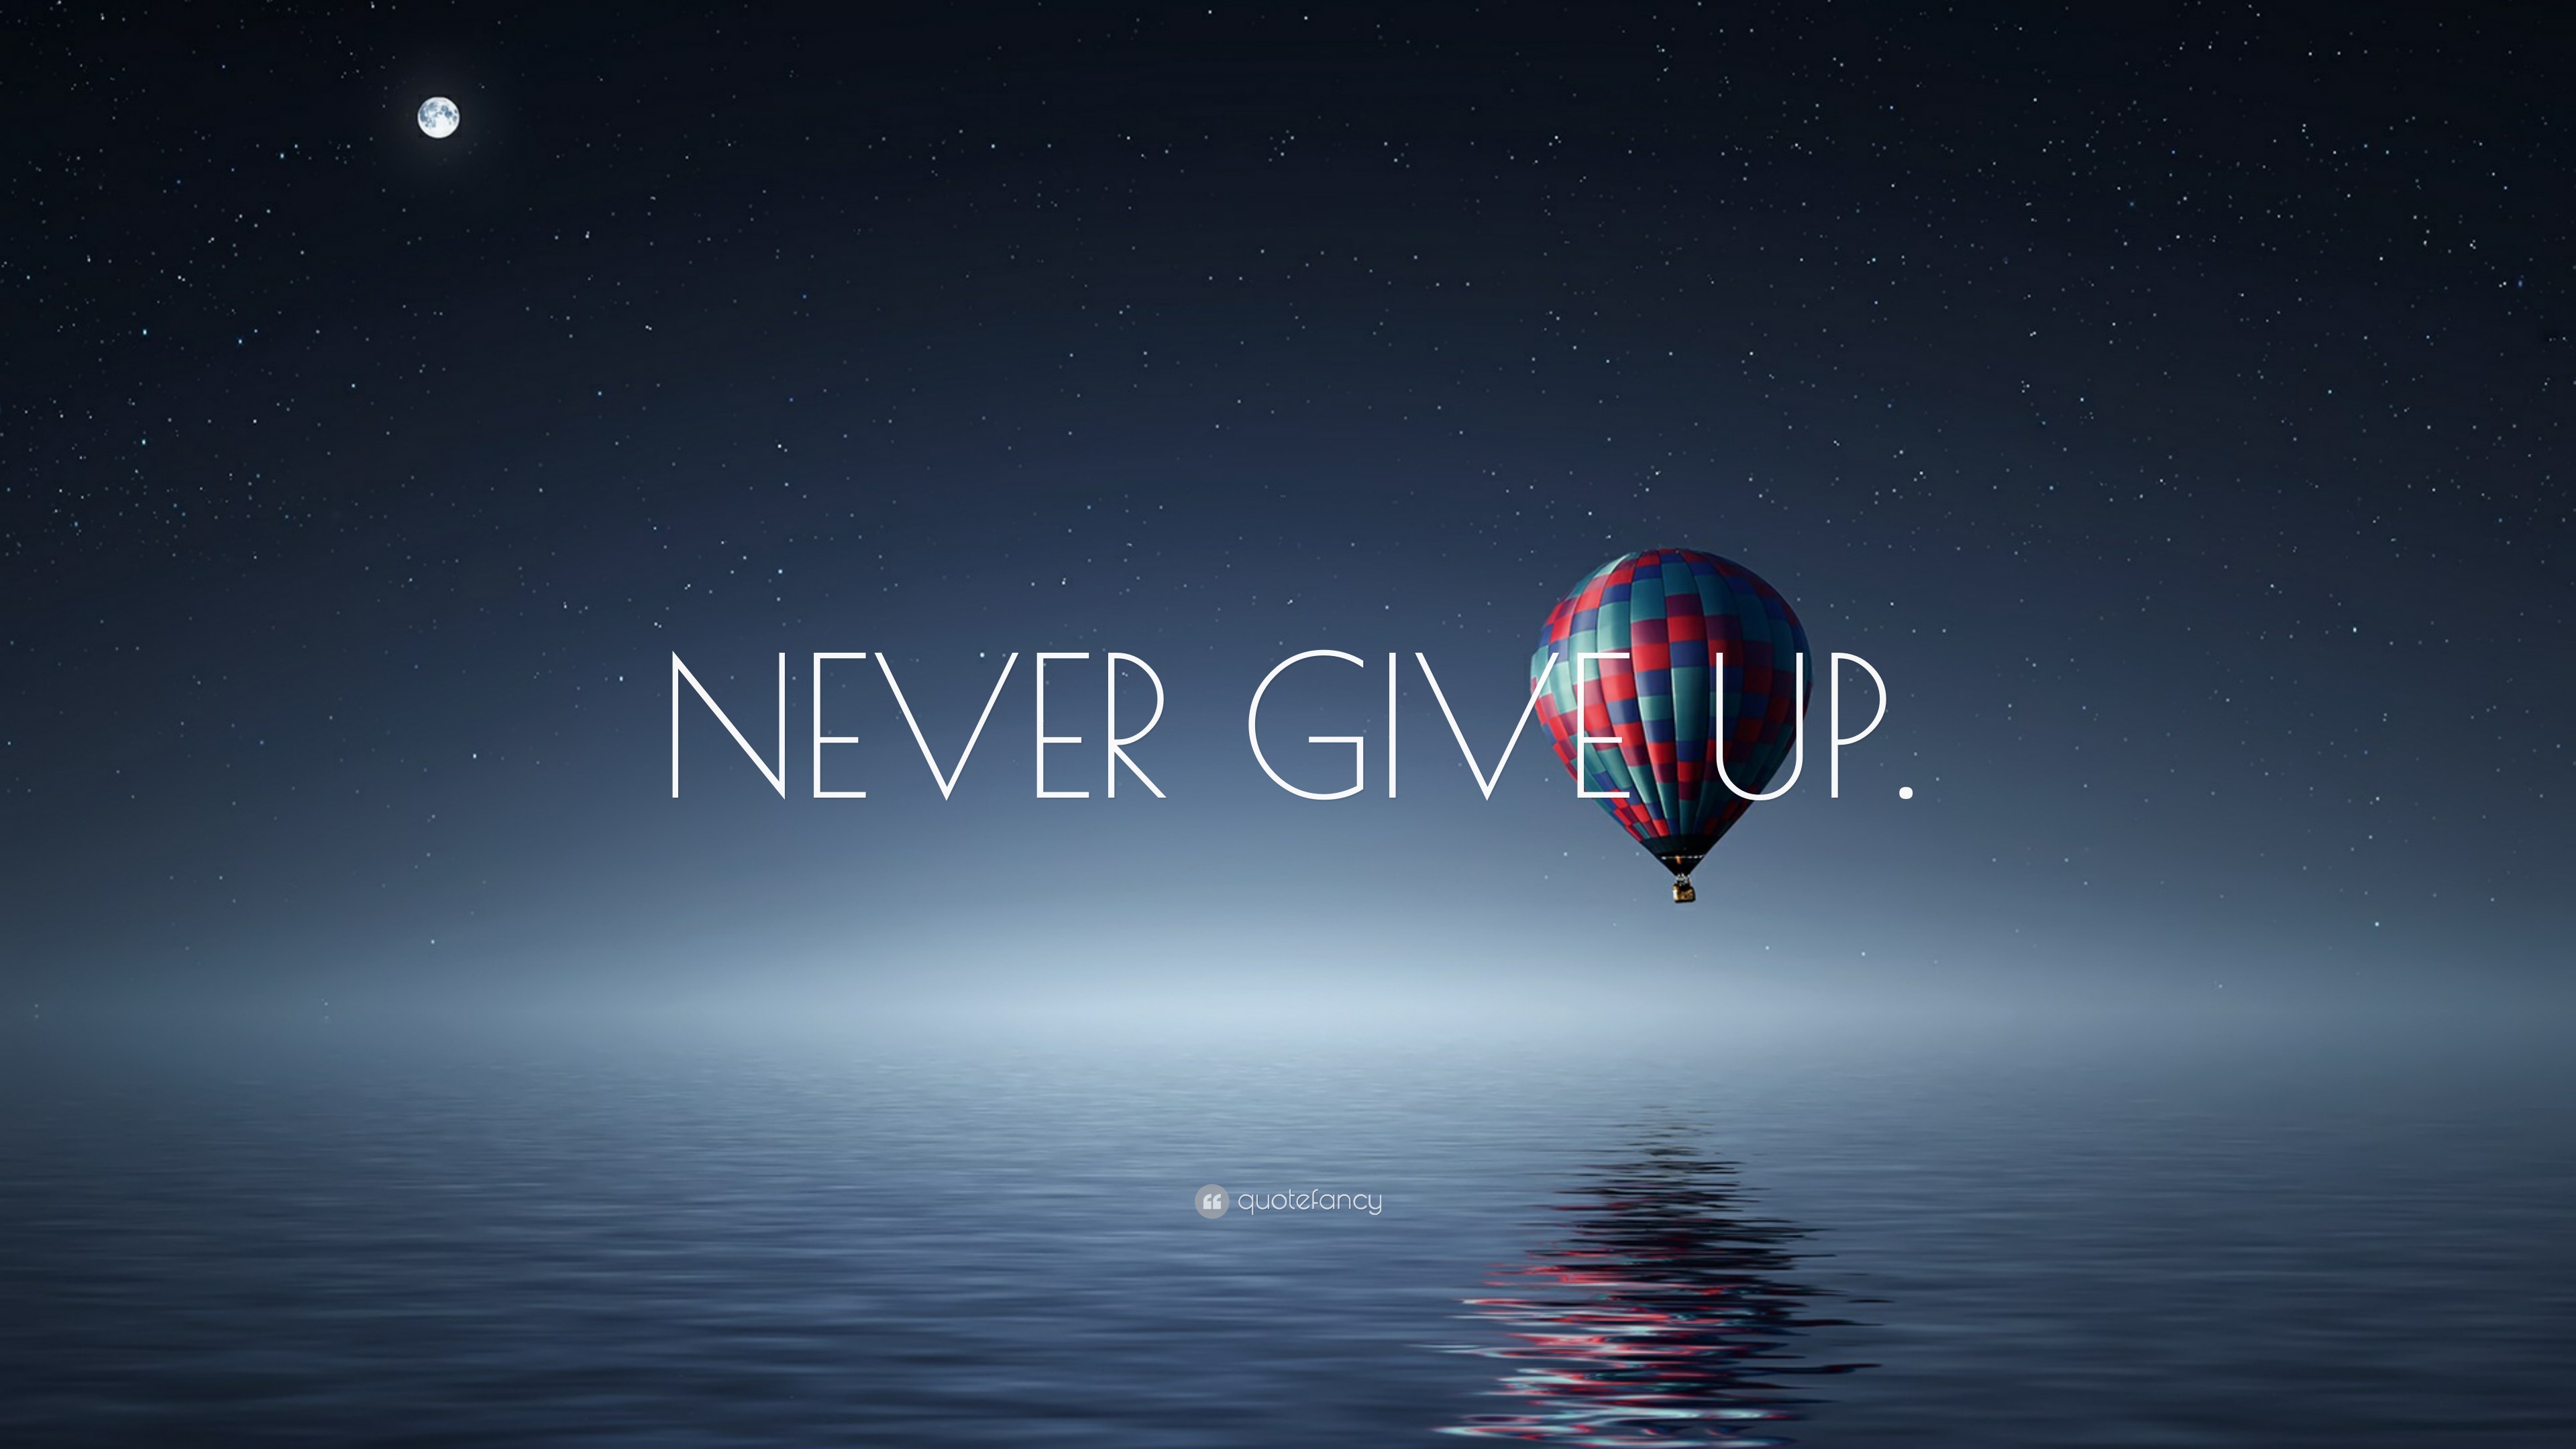 NEVER GIVE UP.” Wallpaper by QuoteFancy